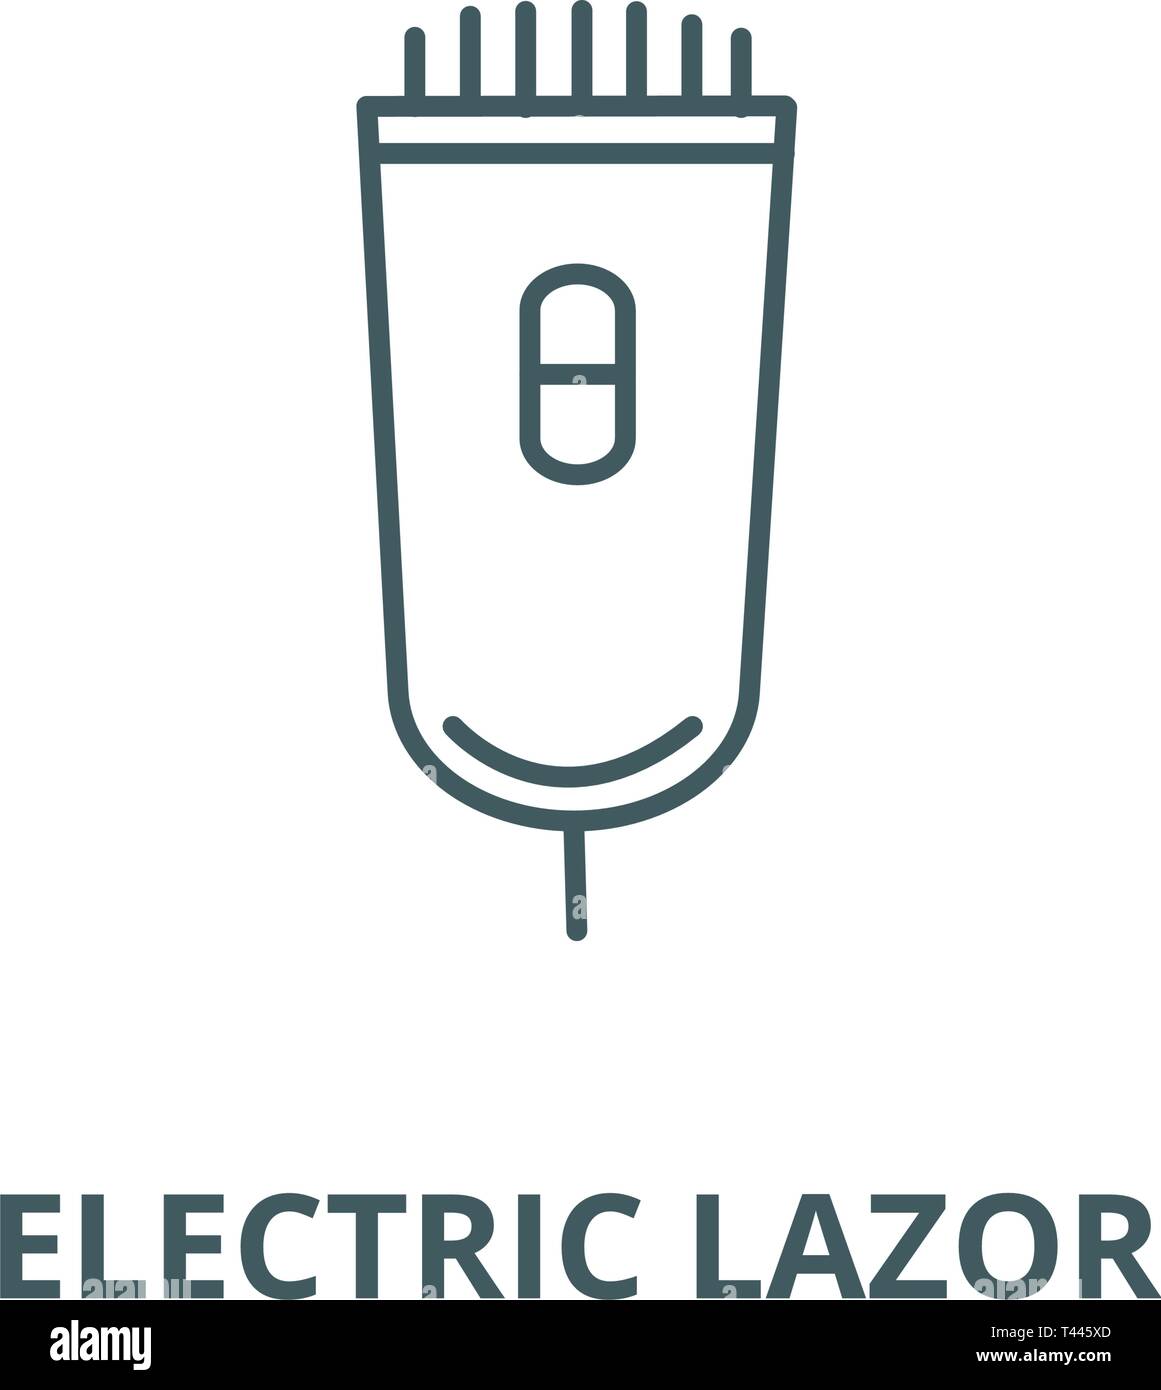 Electric lazor line icon, vector. Electric lazor outline sign, concept symbol, flat illustration Stock Vector